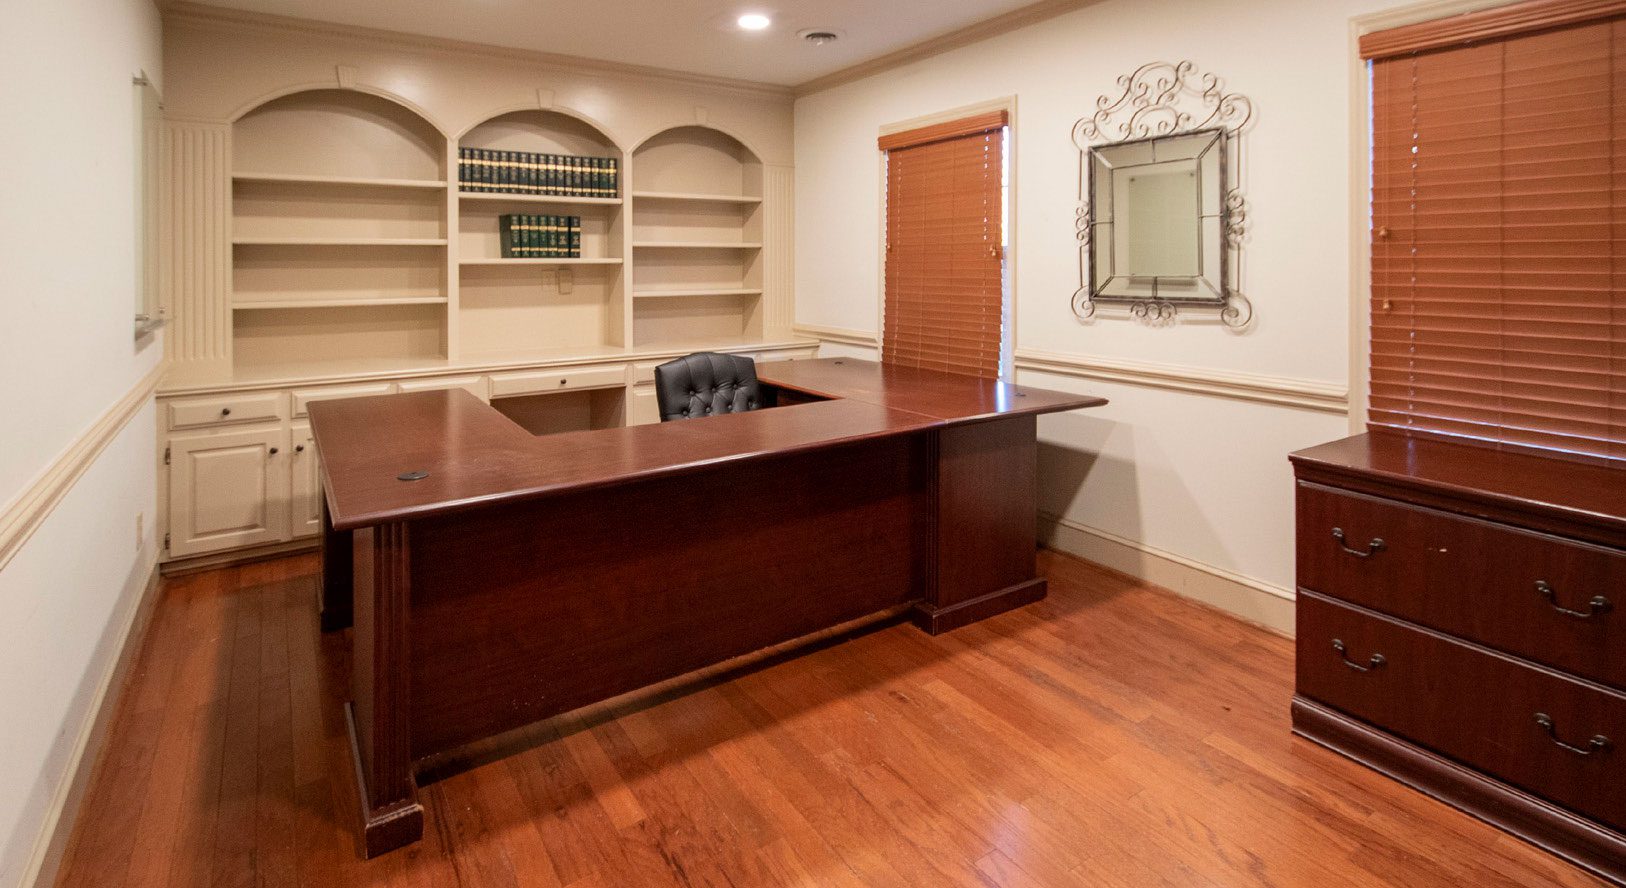 Office with large wooden desk and cut outs in the wall